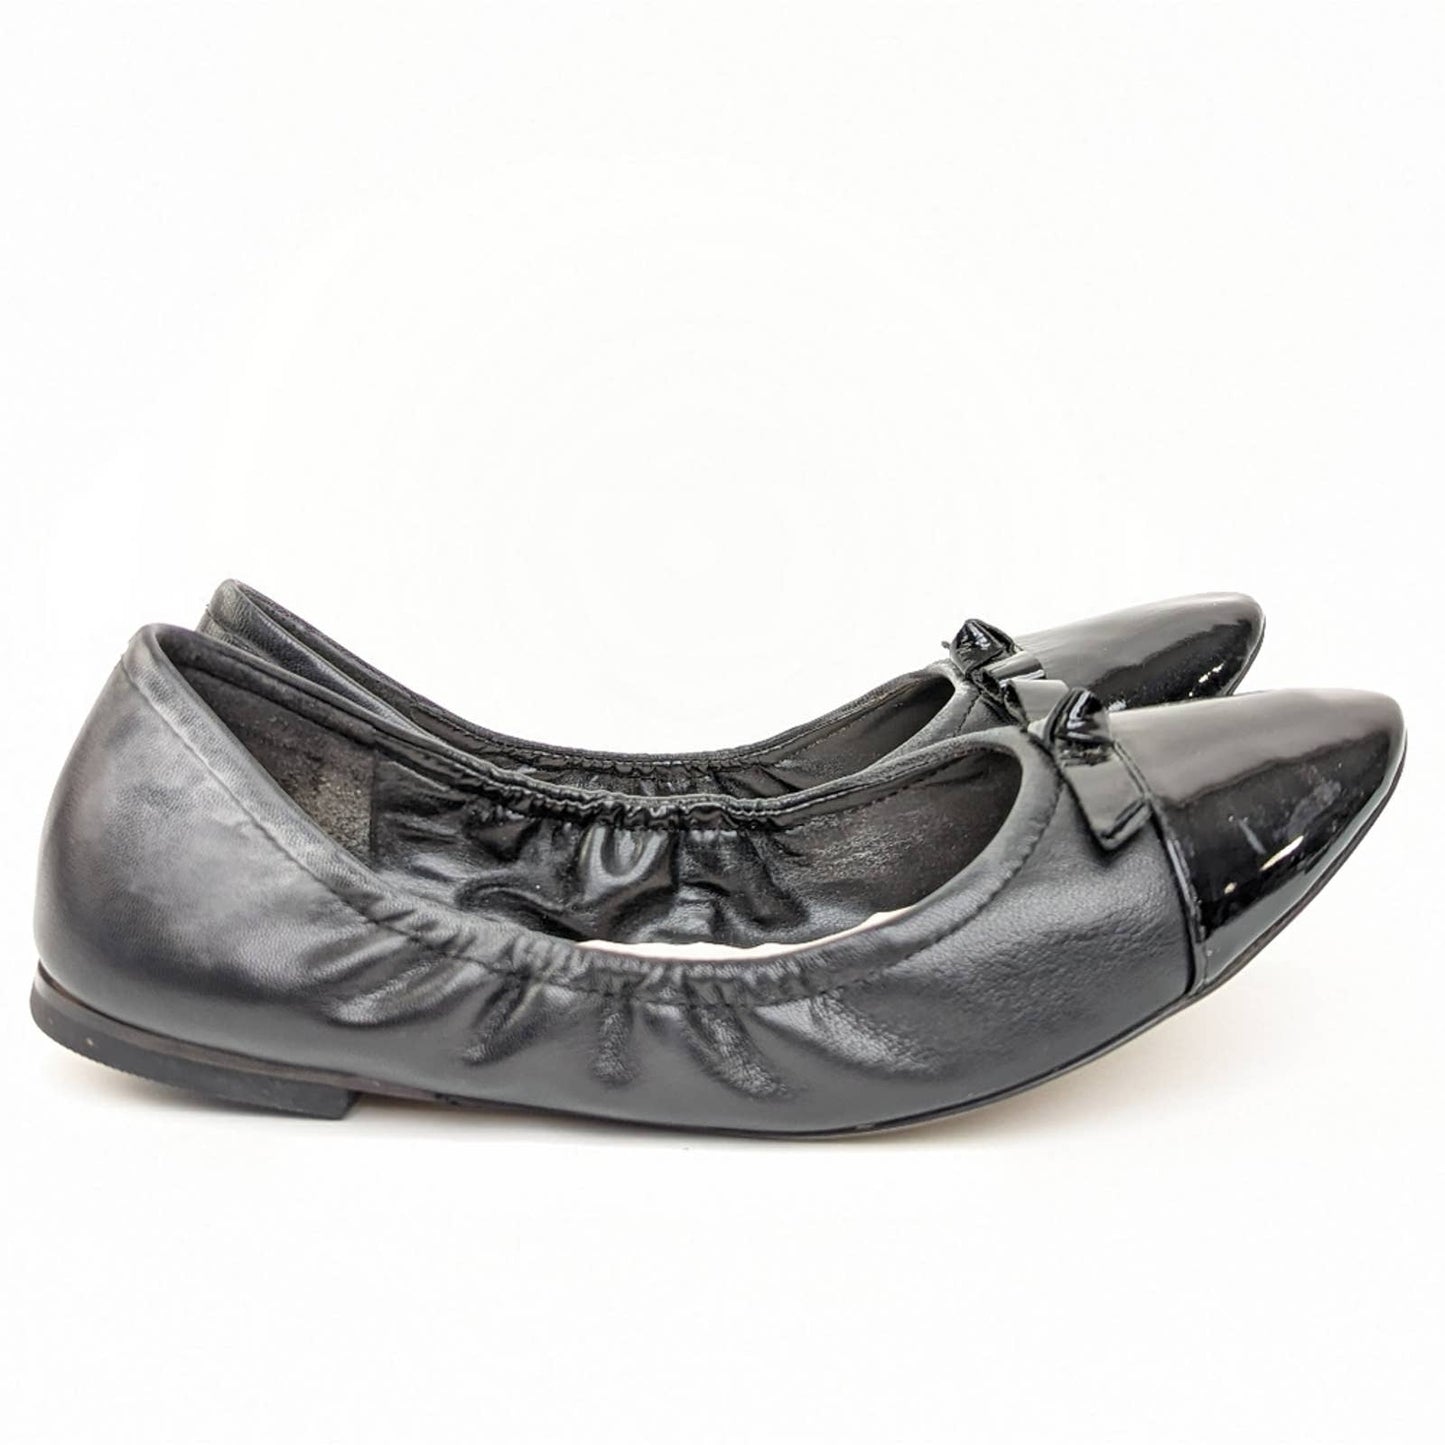 Cole Haan Grand OS Black Leather Ballet Bow Flats - 8